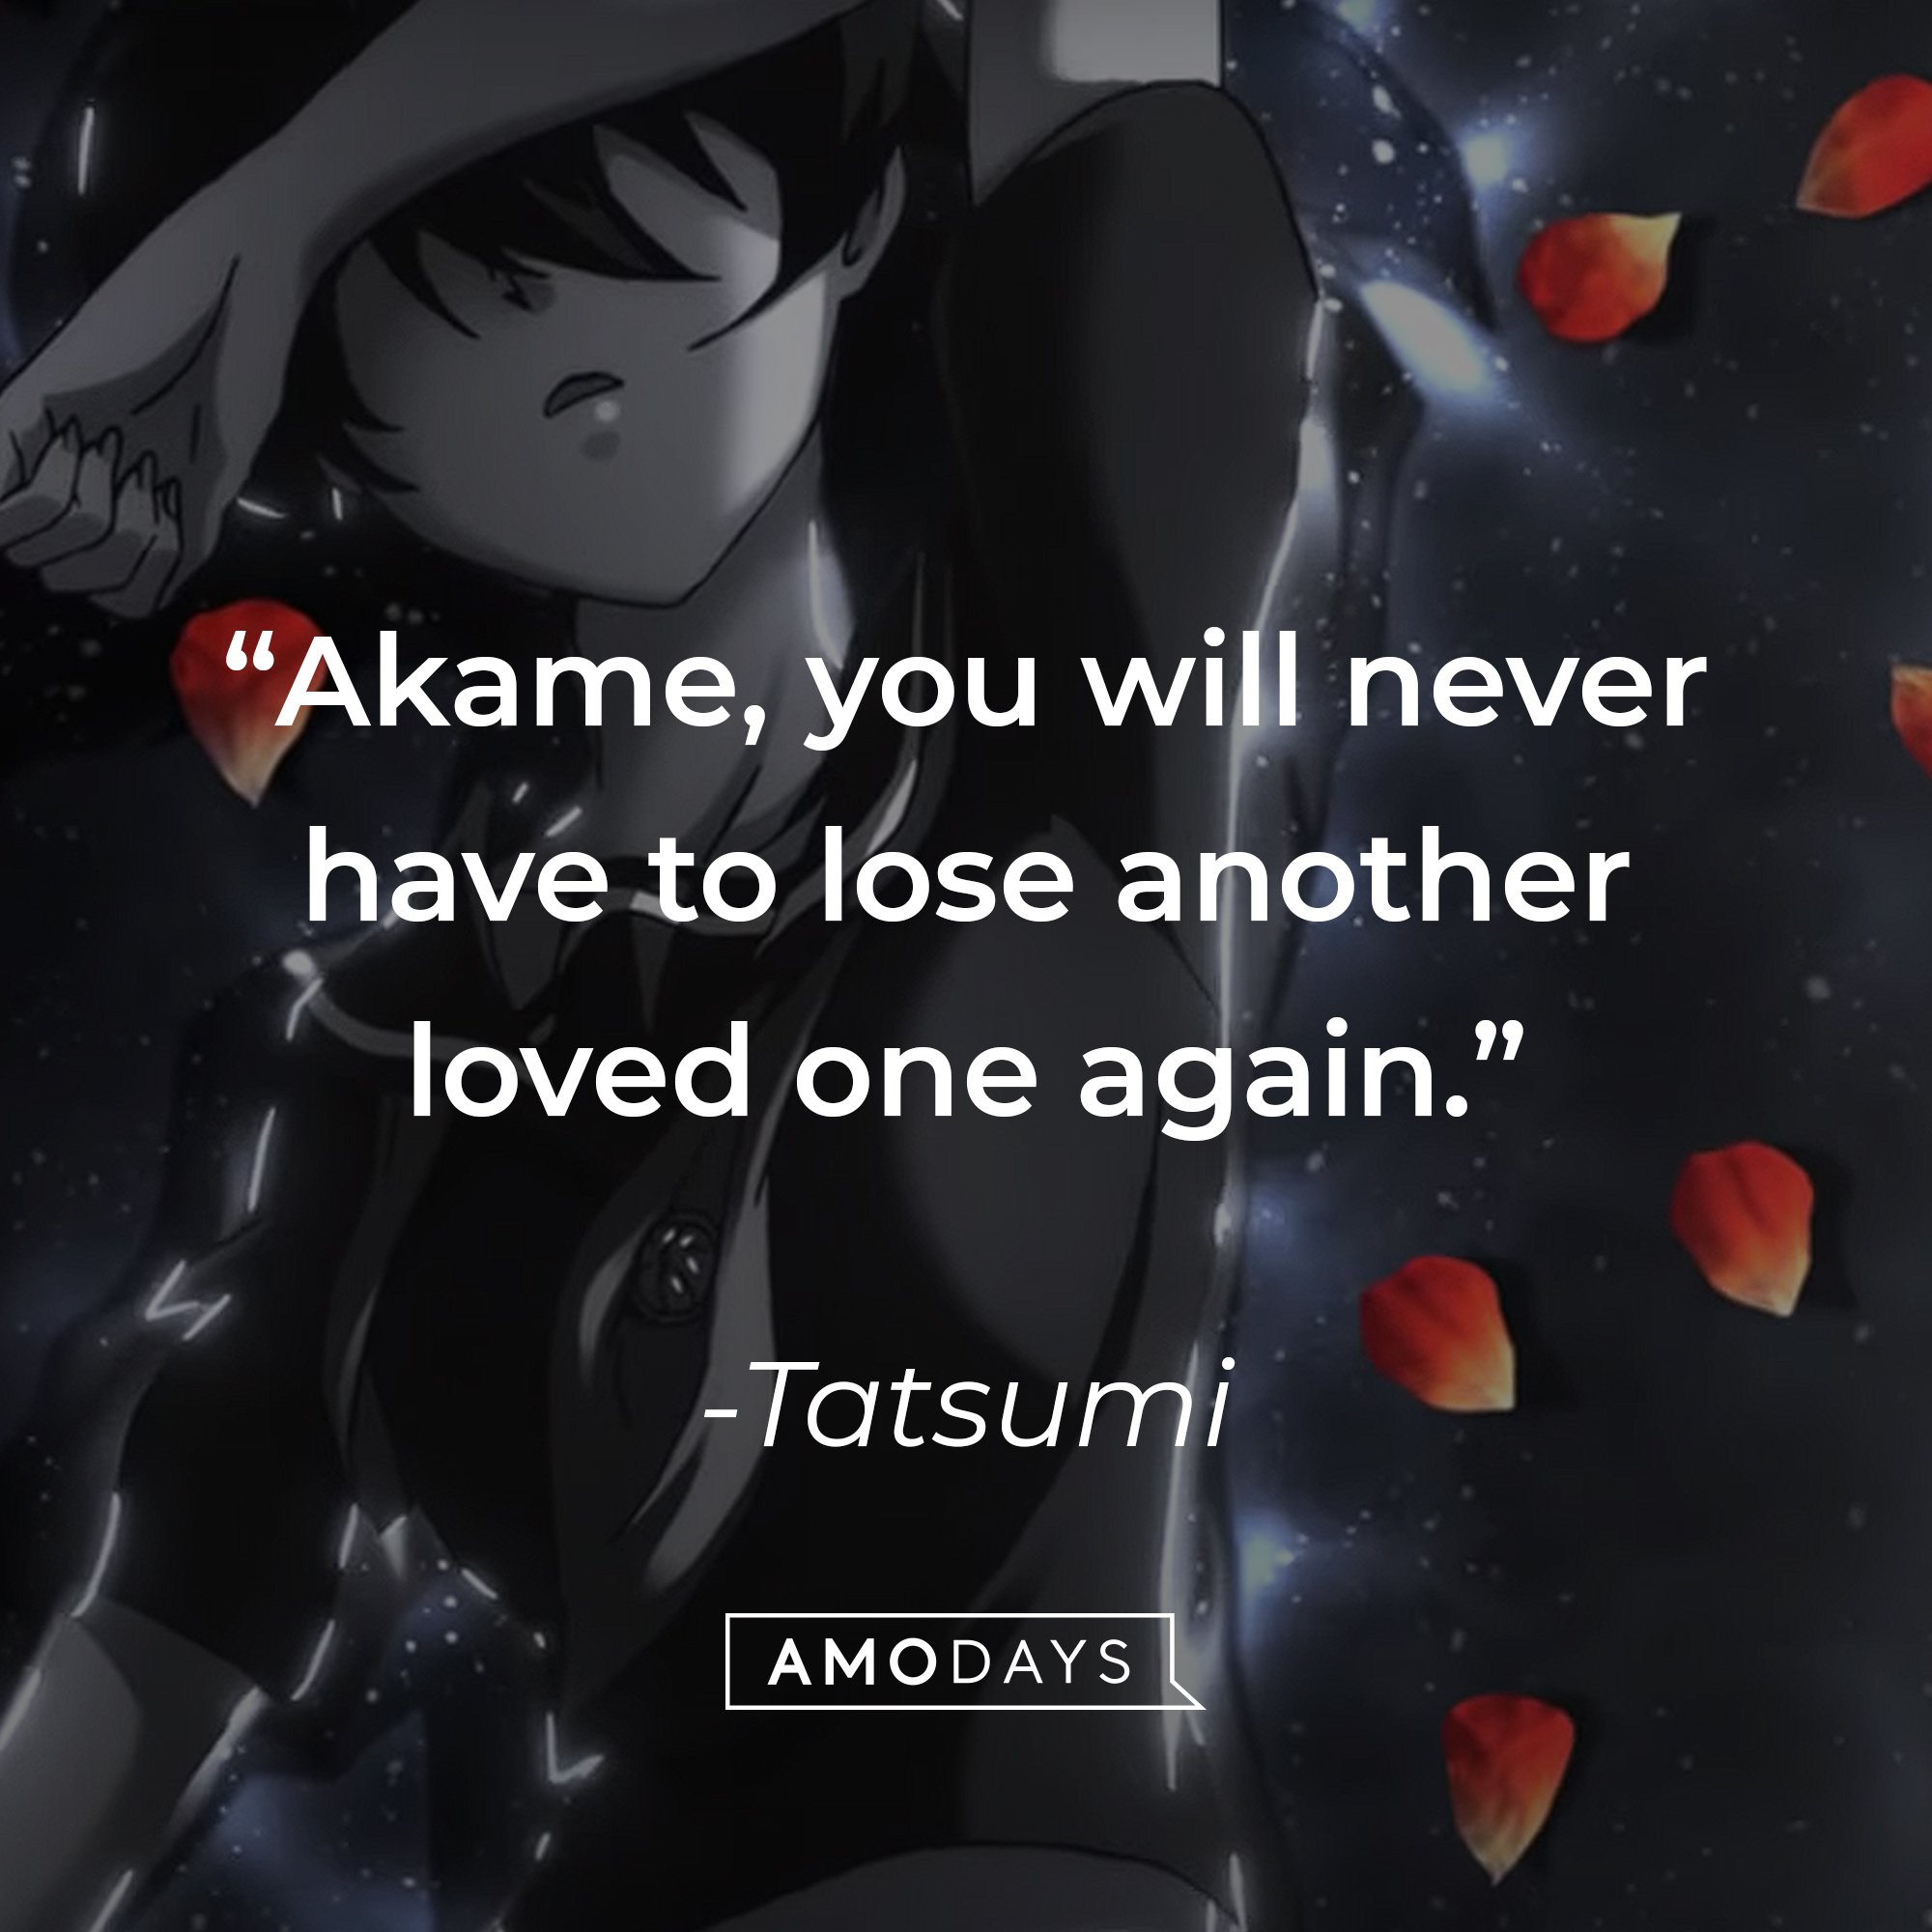 Tatsumi’s quote: “Akame, you will never have to lose another loved one again." | Image: AmoDays